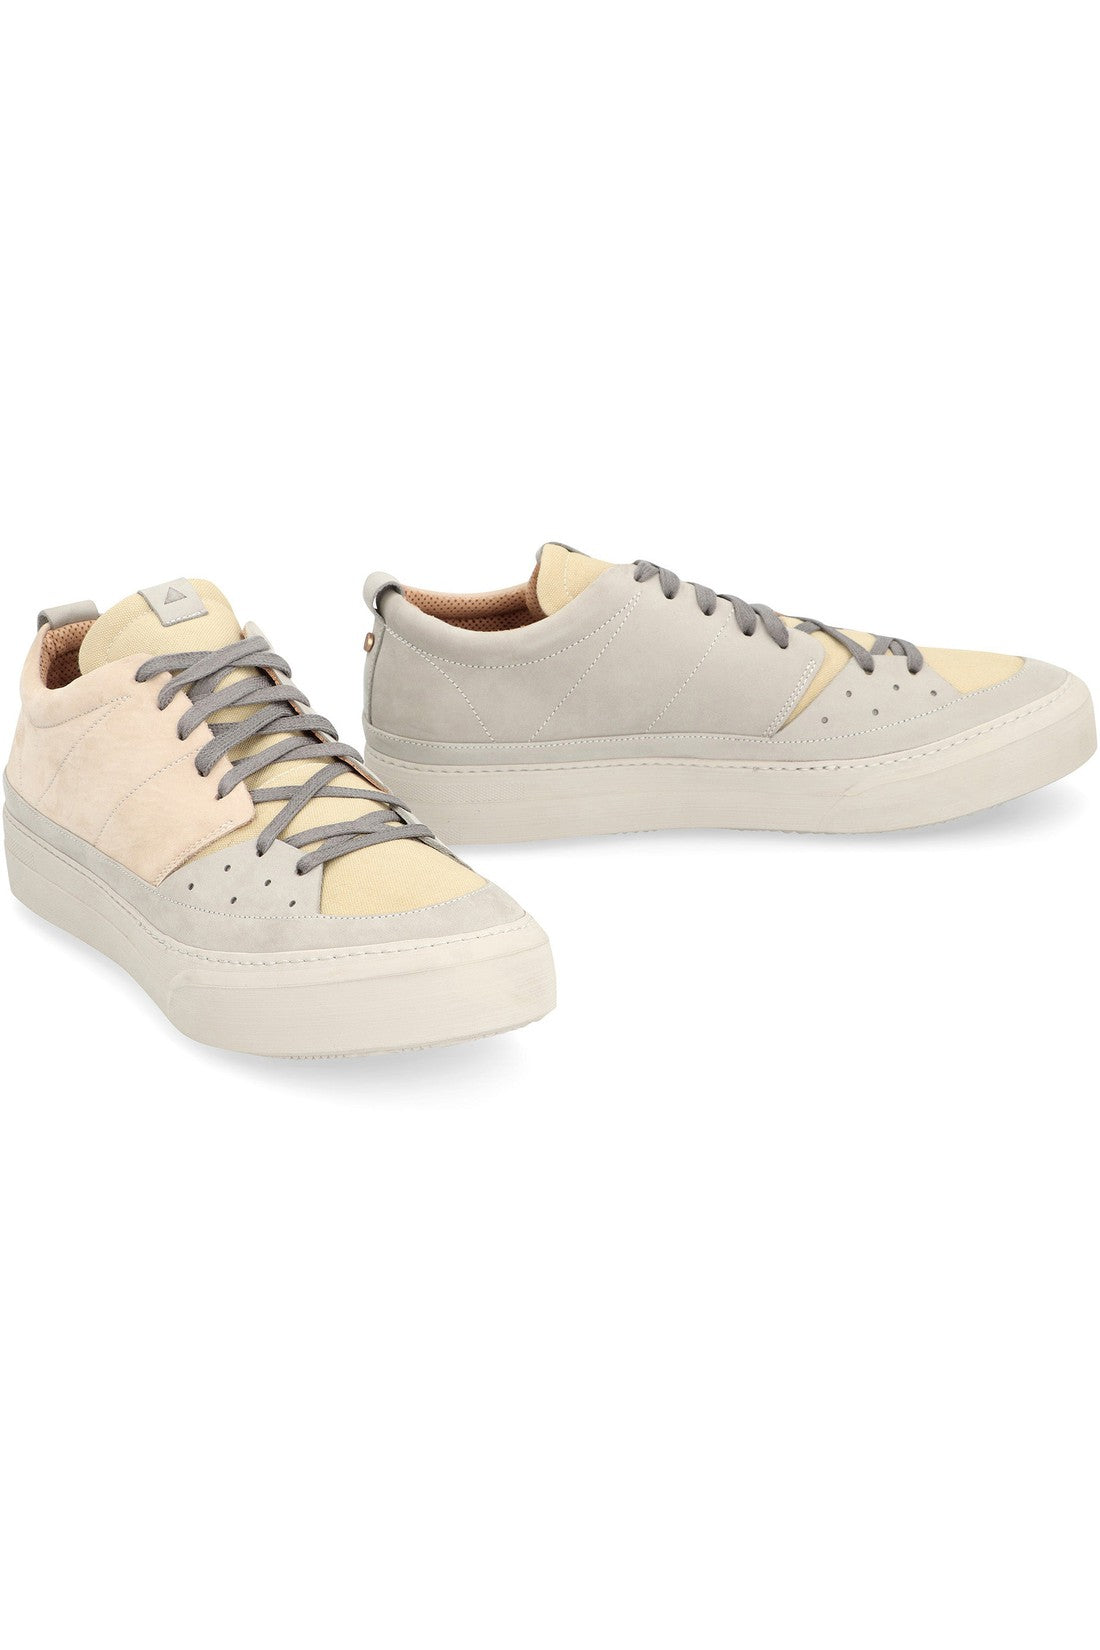 Judoka Grizzly low-top sneakers